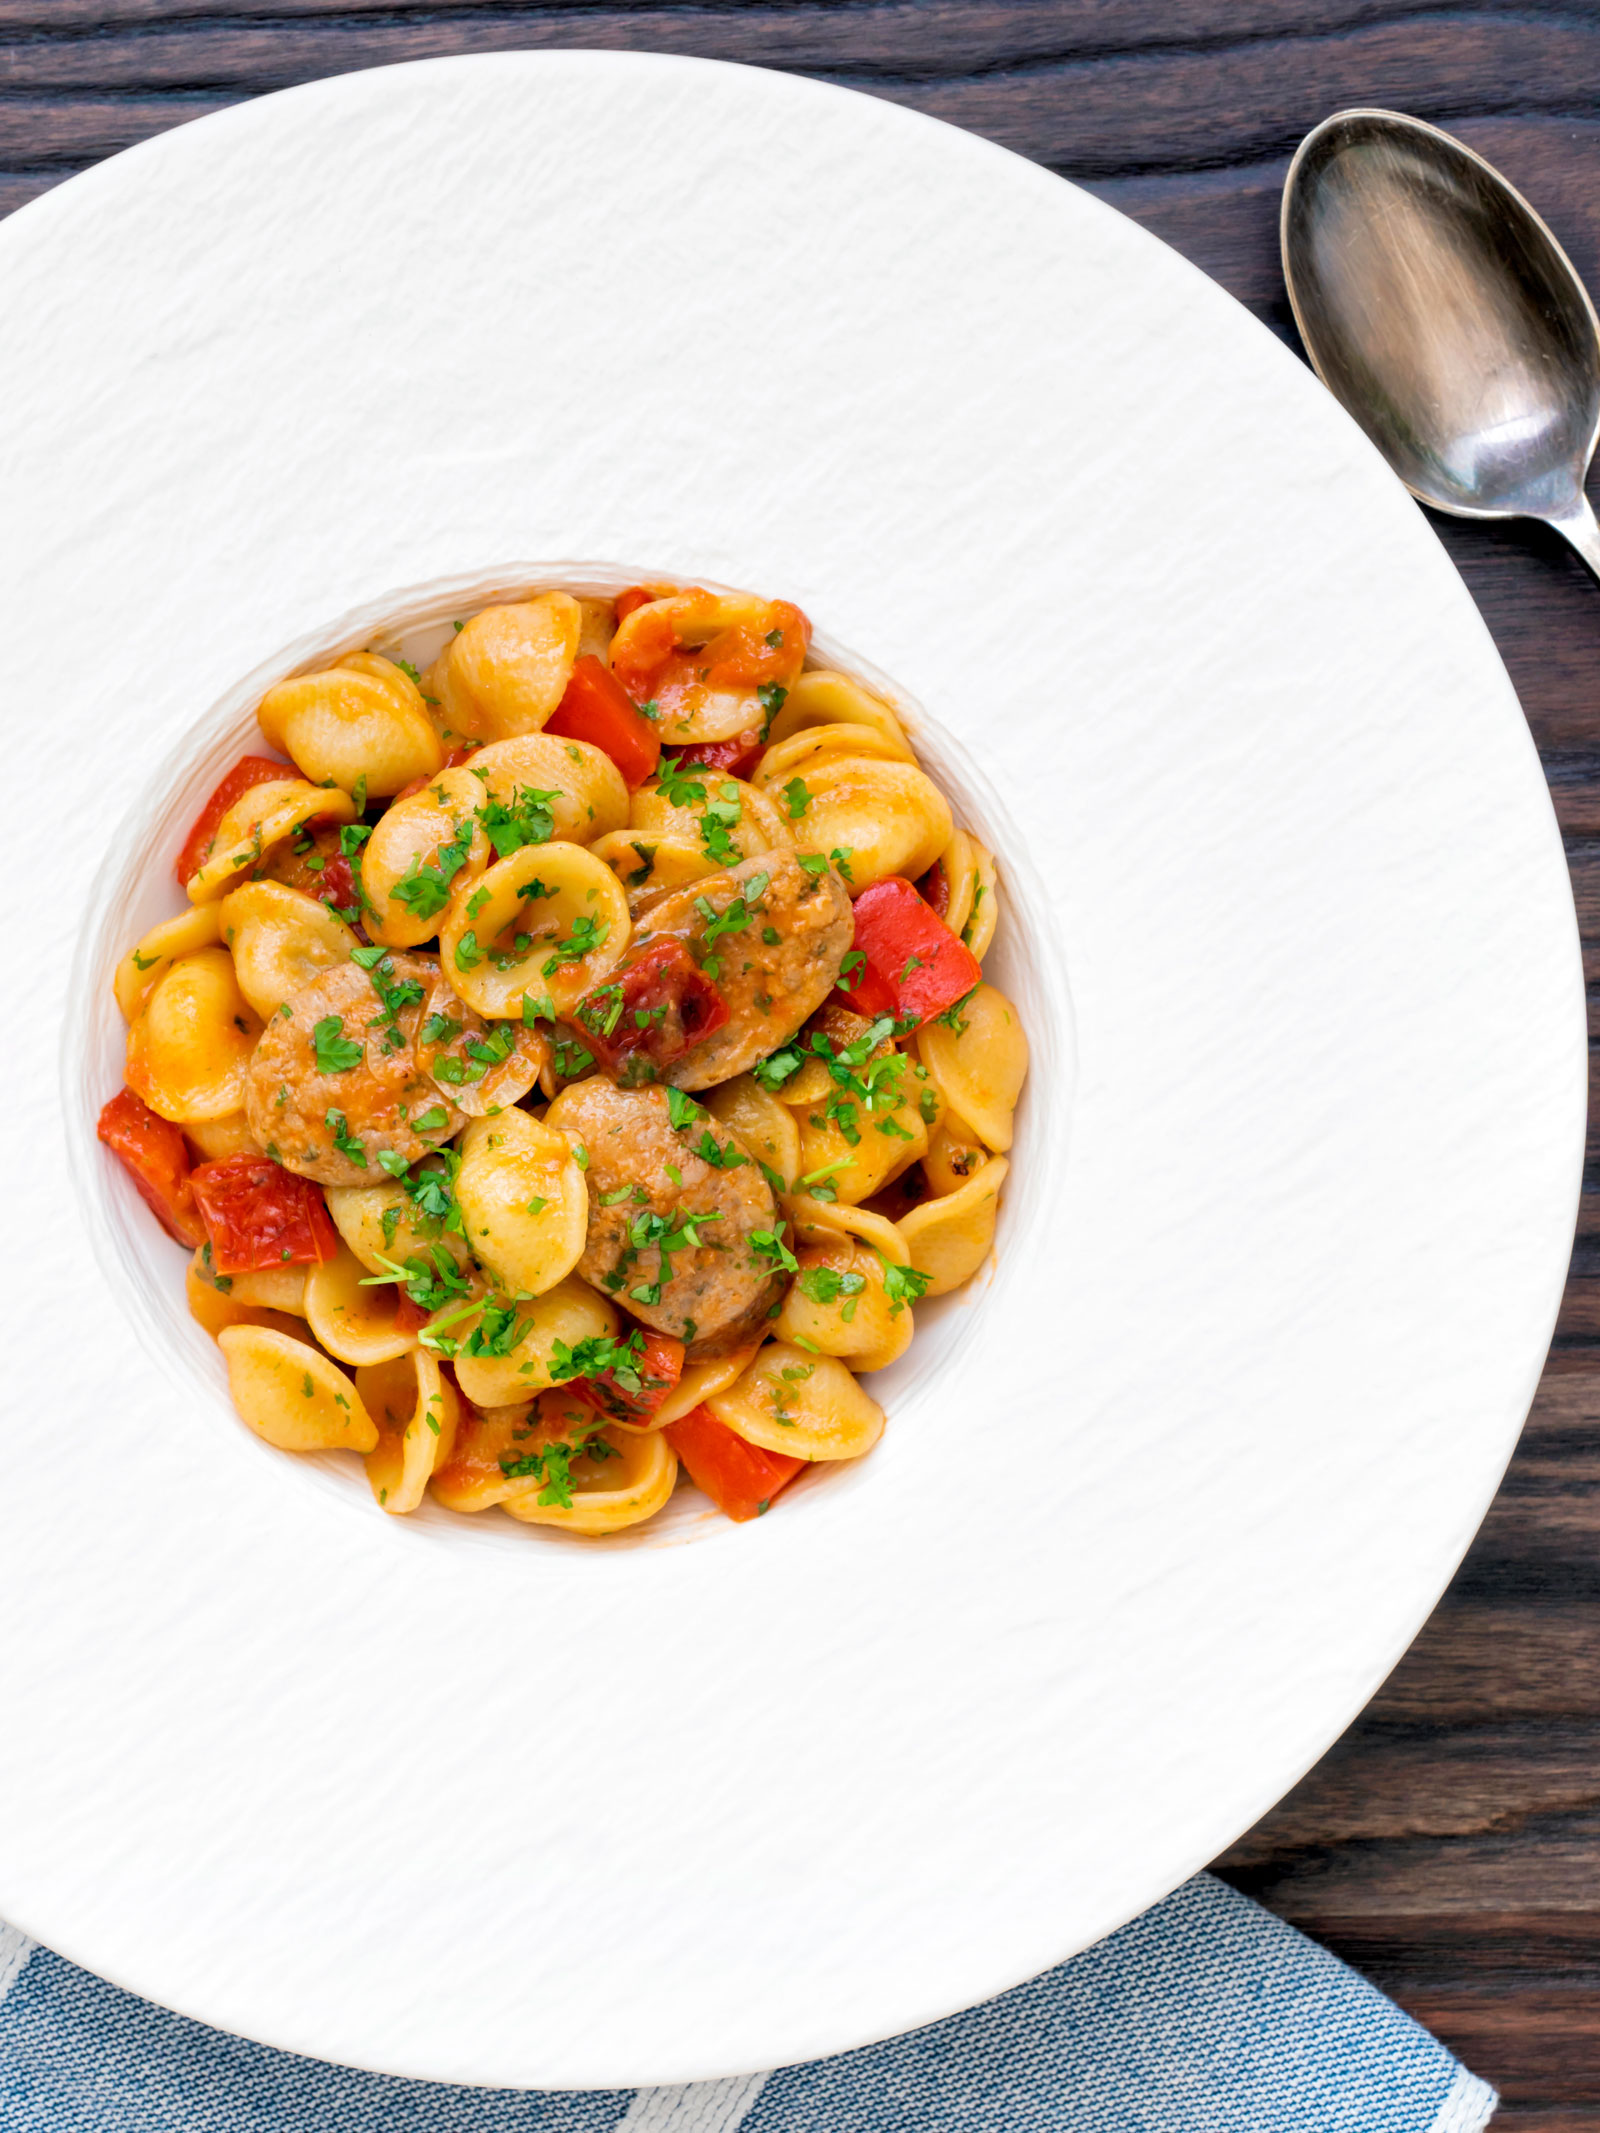 Overhead sausage and pepper orecchiette pasta in a light tomato sauce with fresh parsley.